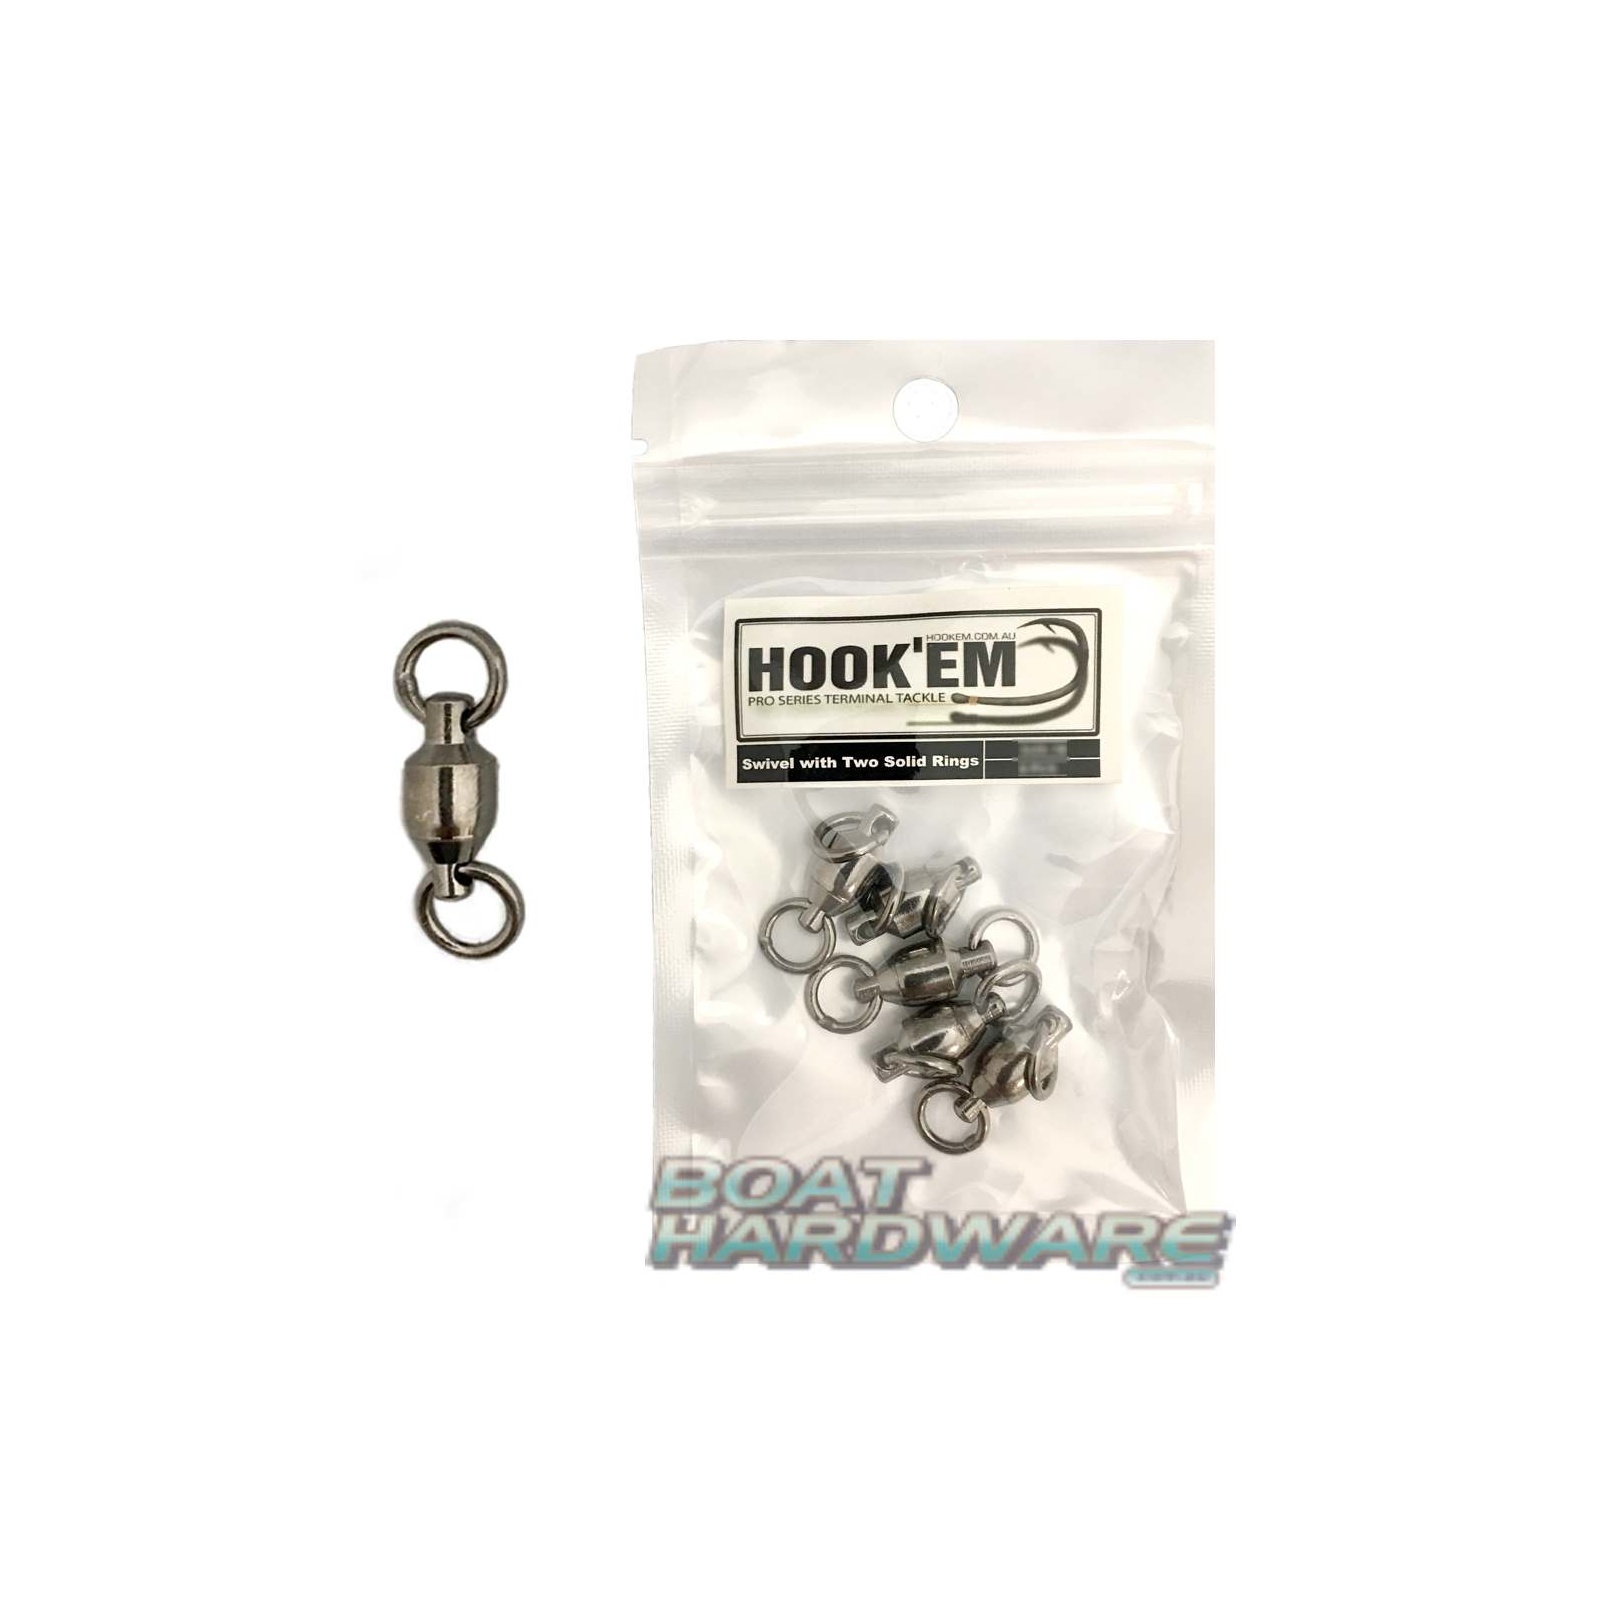 Size 8 Ball Bearing Swivel - 2 Solid Rings (Pack of 5)